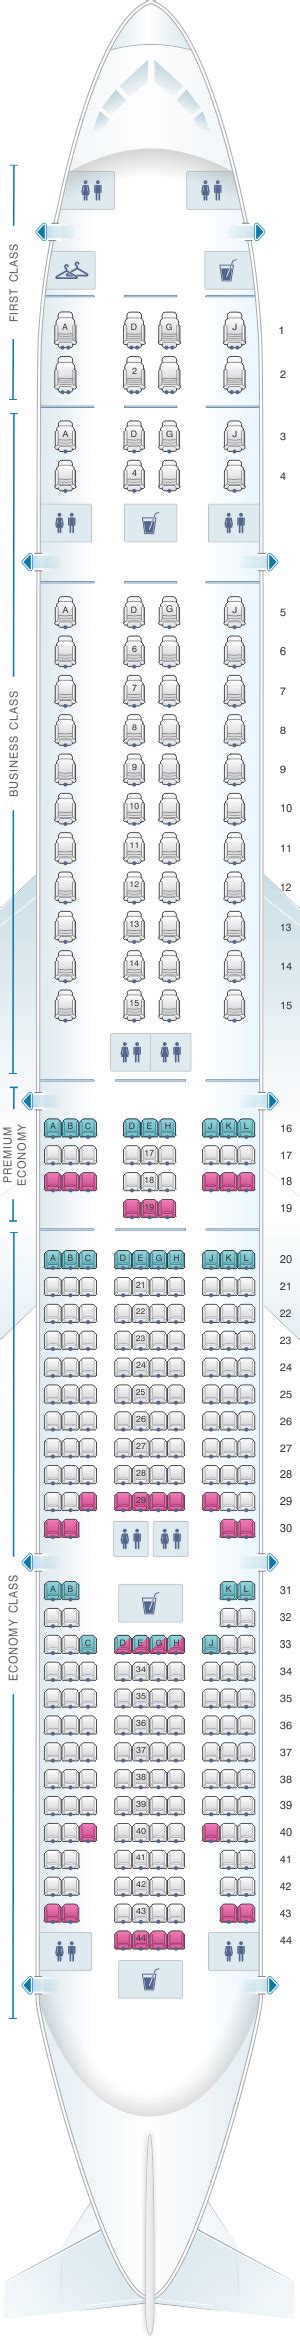 Boeing 777 300er seat map american airlines - 42L. this seat may have limited recline. this seat is near the lavatory. 43L. this seat has extra legroom. no underseat stowage. no under-seat stowage during takeoff and landing. traytable in armrest means narrower seat. 33K. 